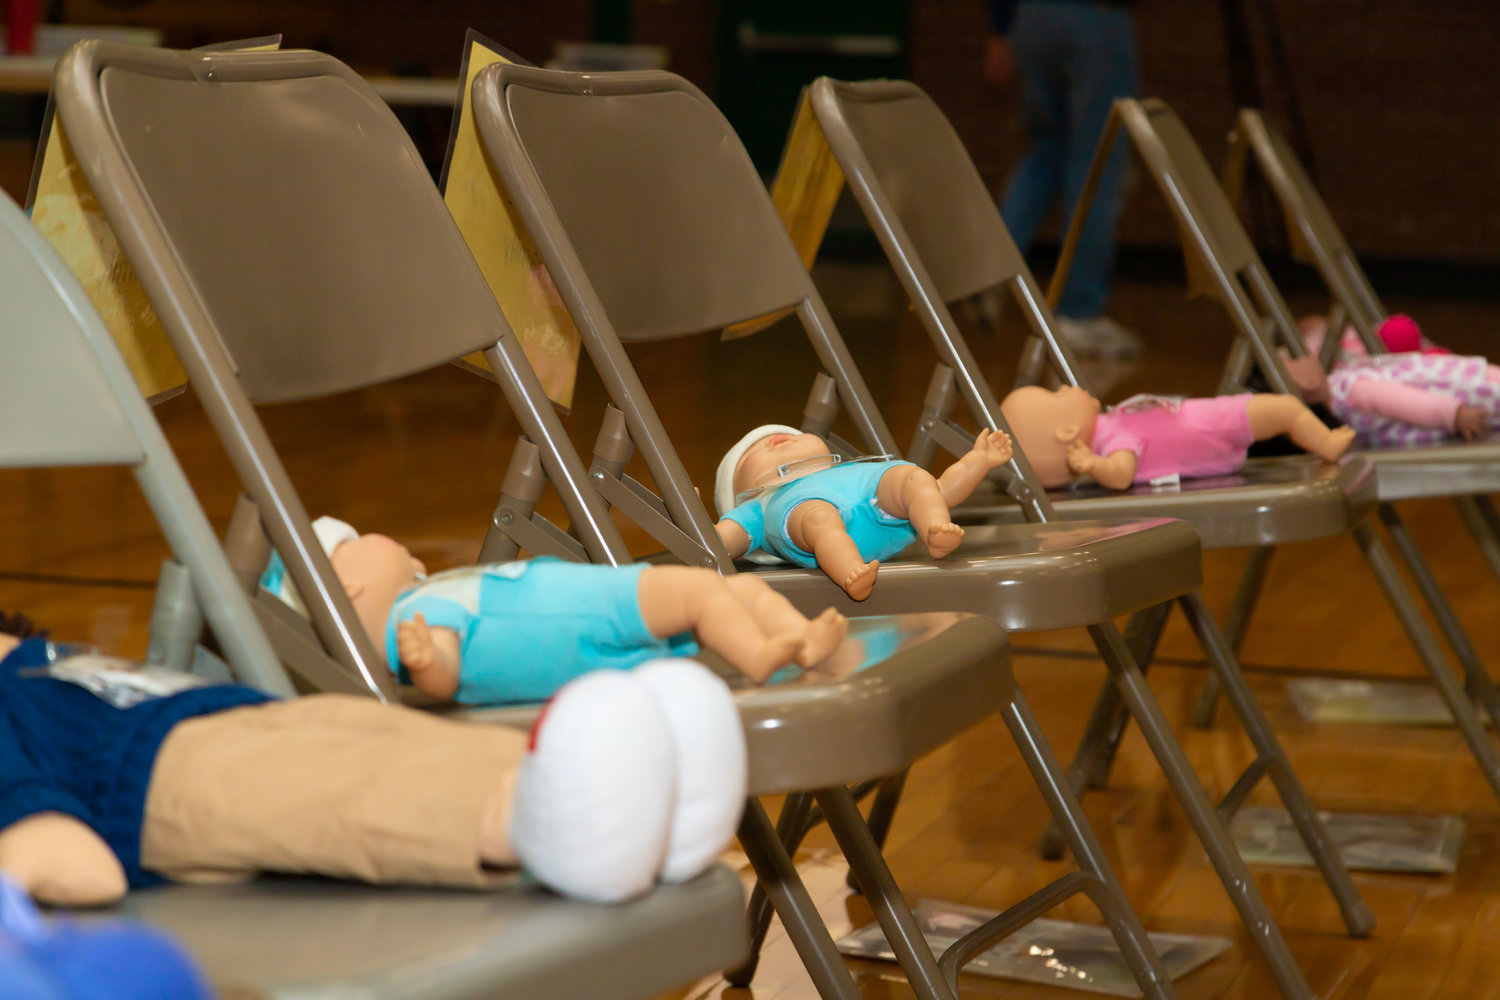 Dolls await their new parents in a simulation presented by North East Community Action Corporation.